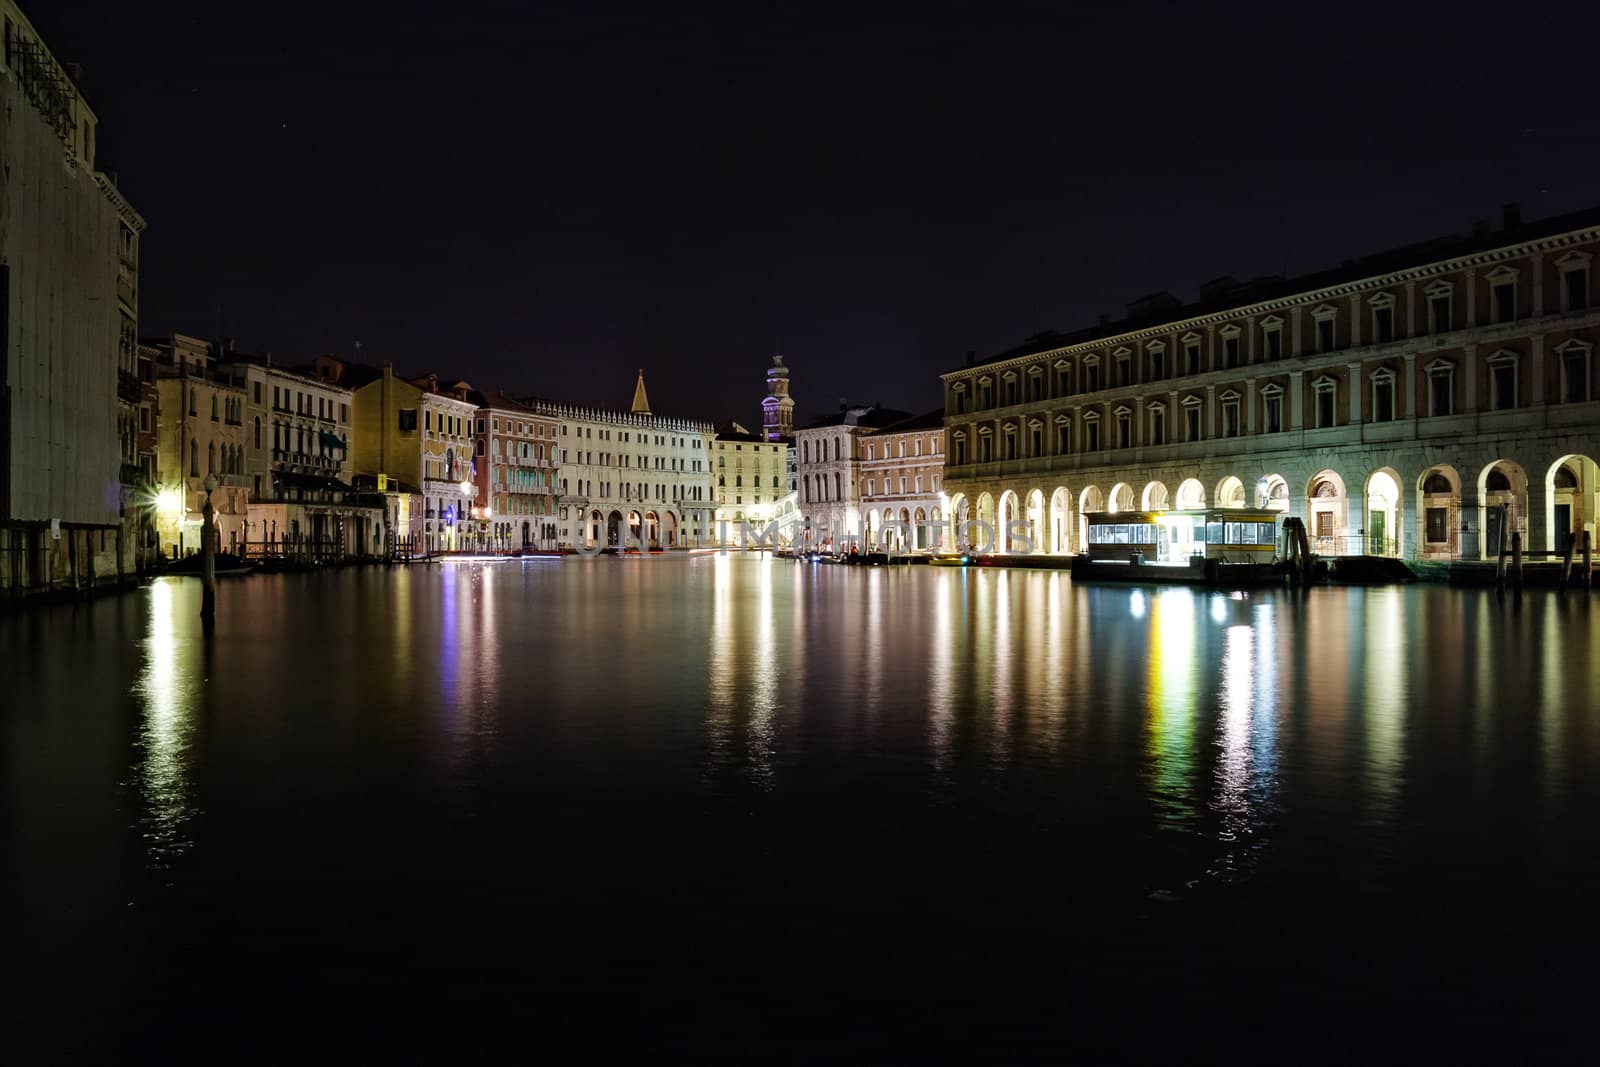 Grand Canal at night, Venice. Italy